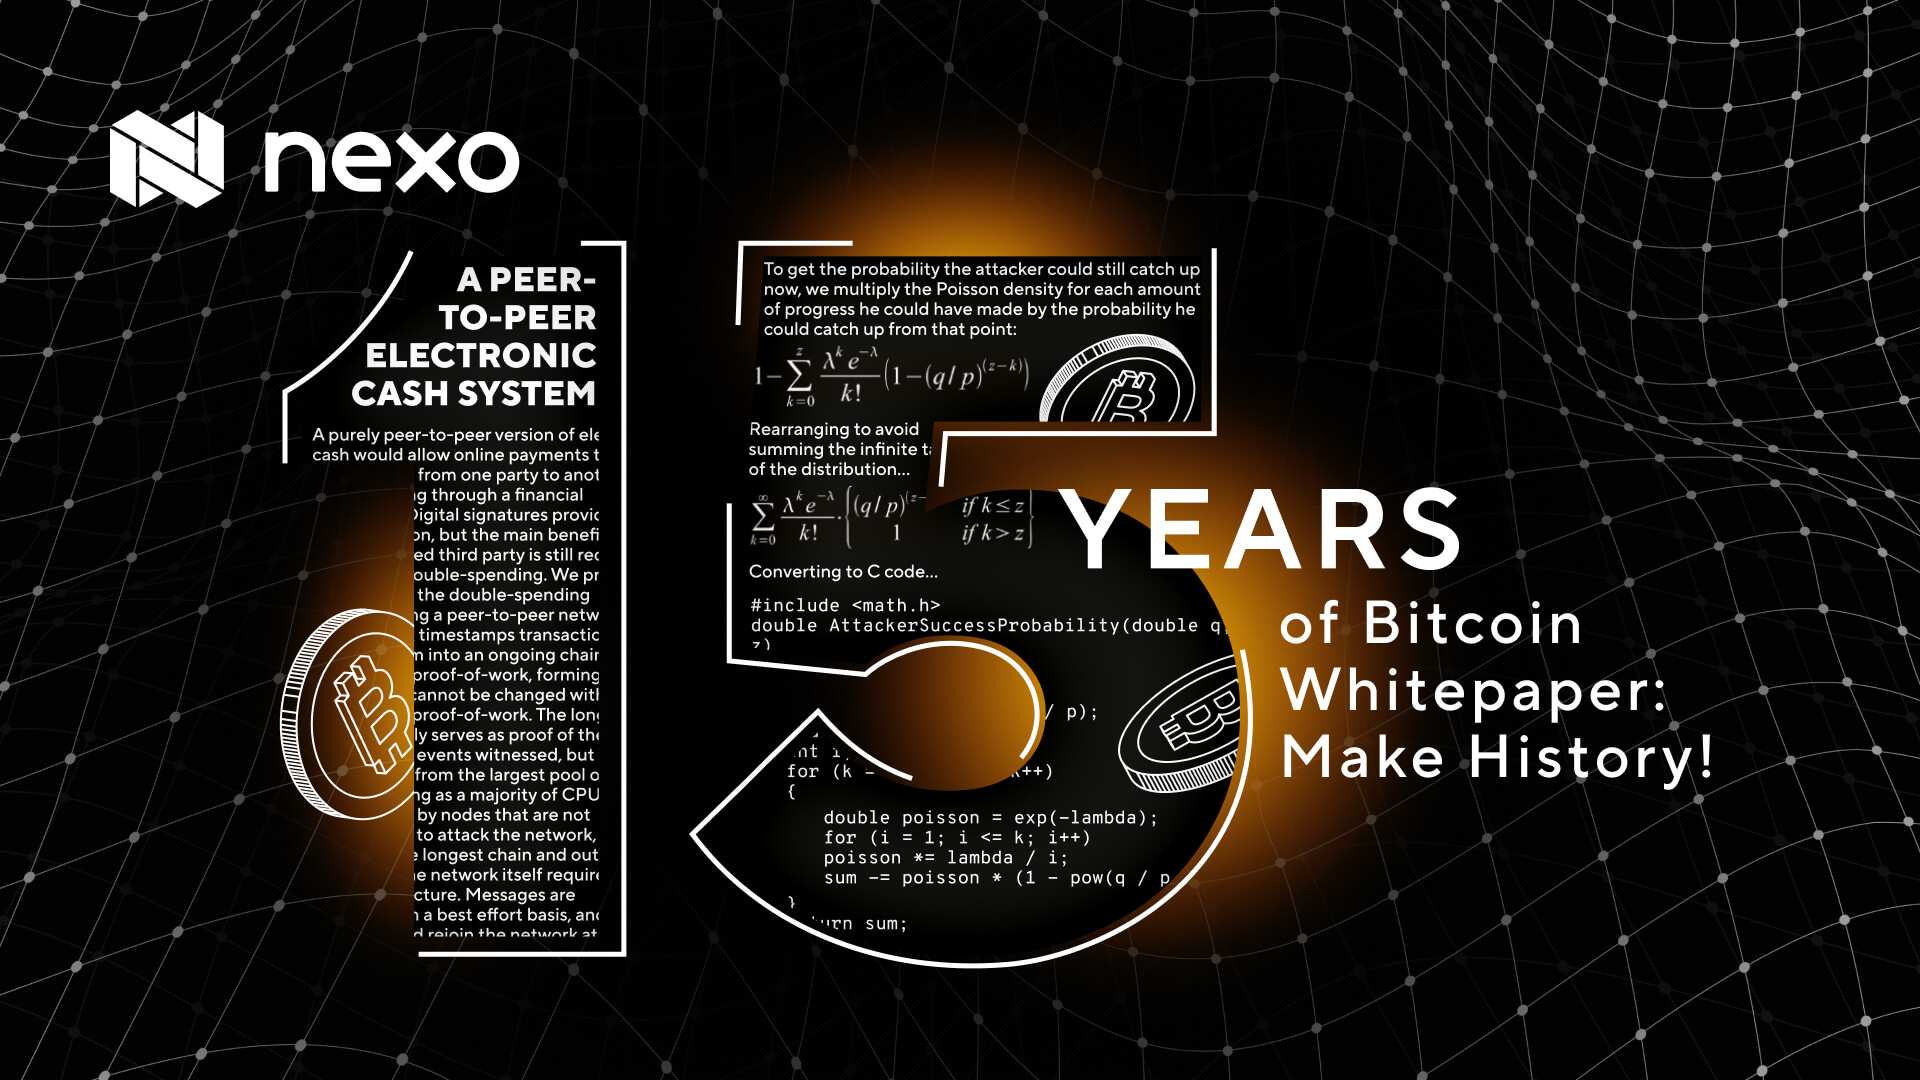 Celebrating 15 Years of the Bitcoin Whitepaper with Our Community